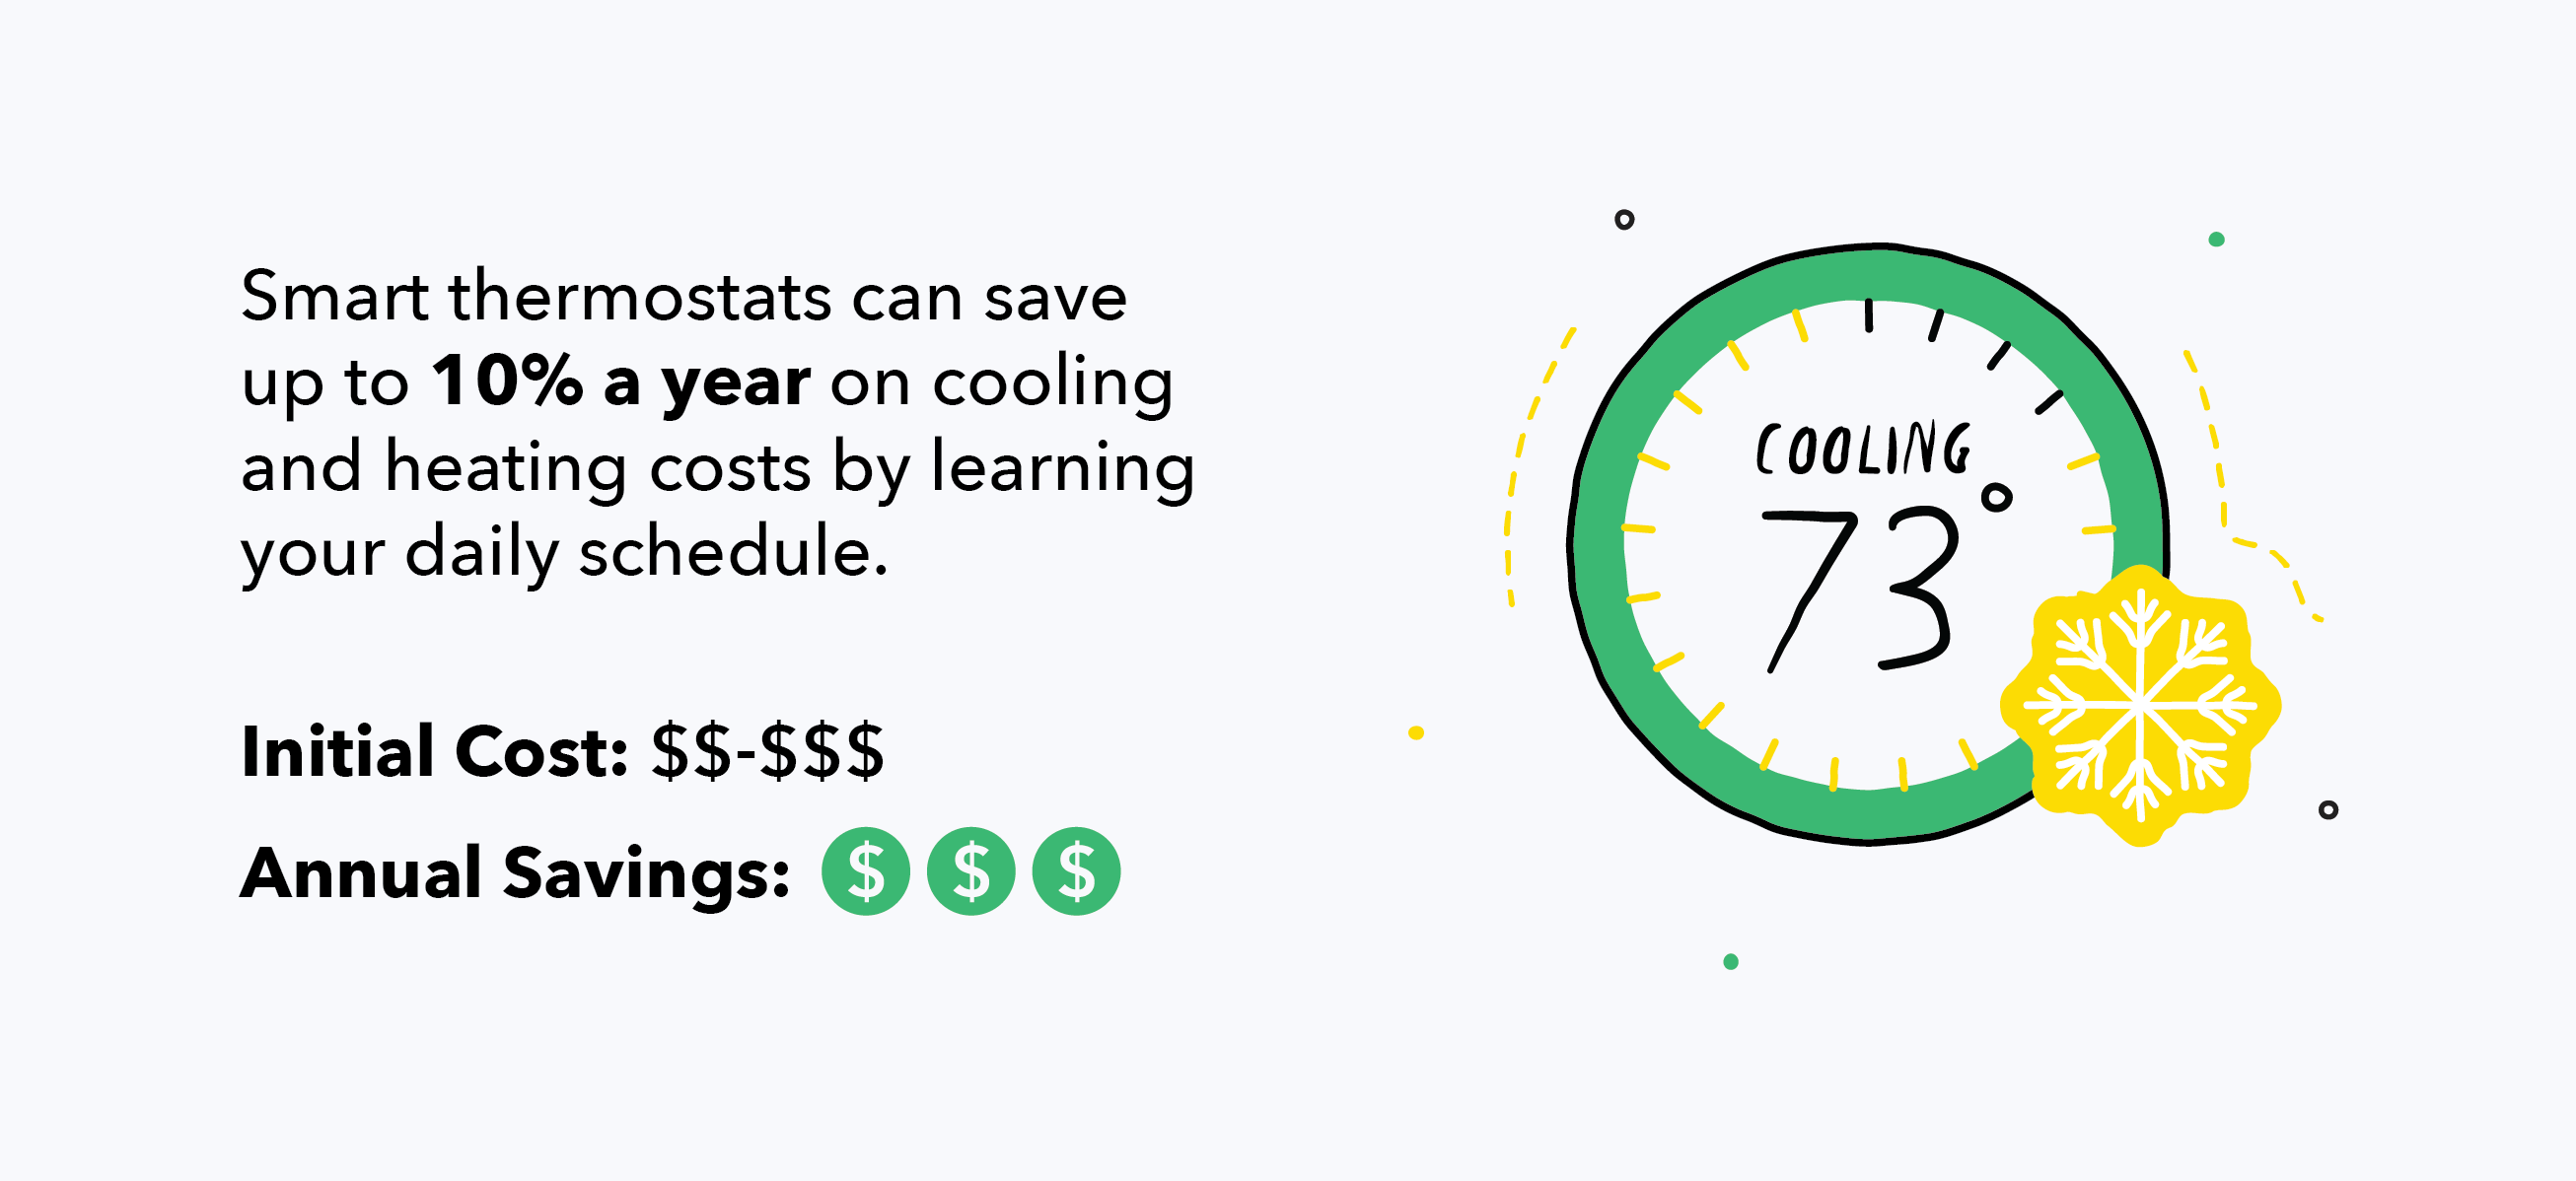 smart thermostats can save 10% on heating and cooling